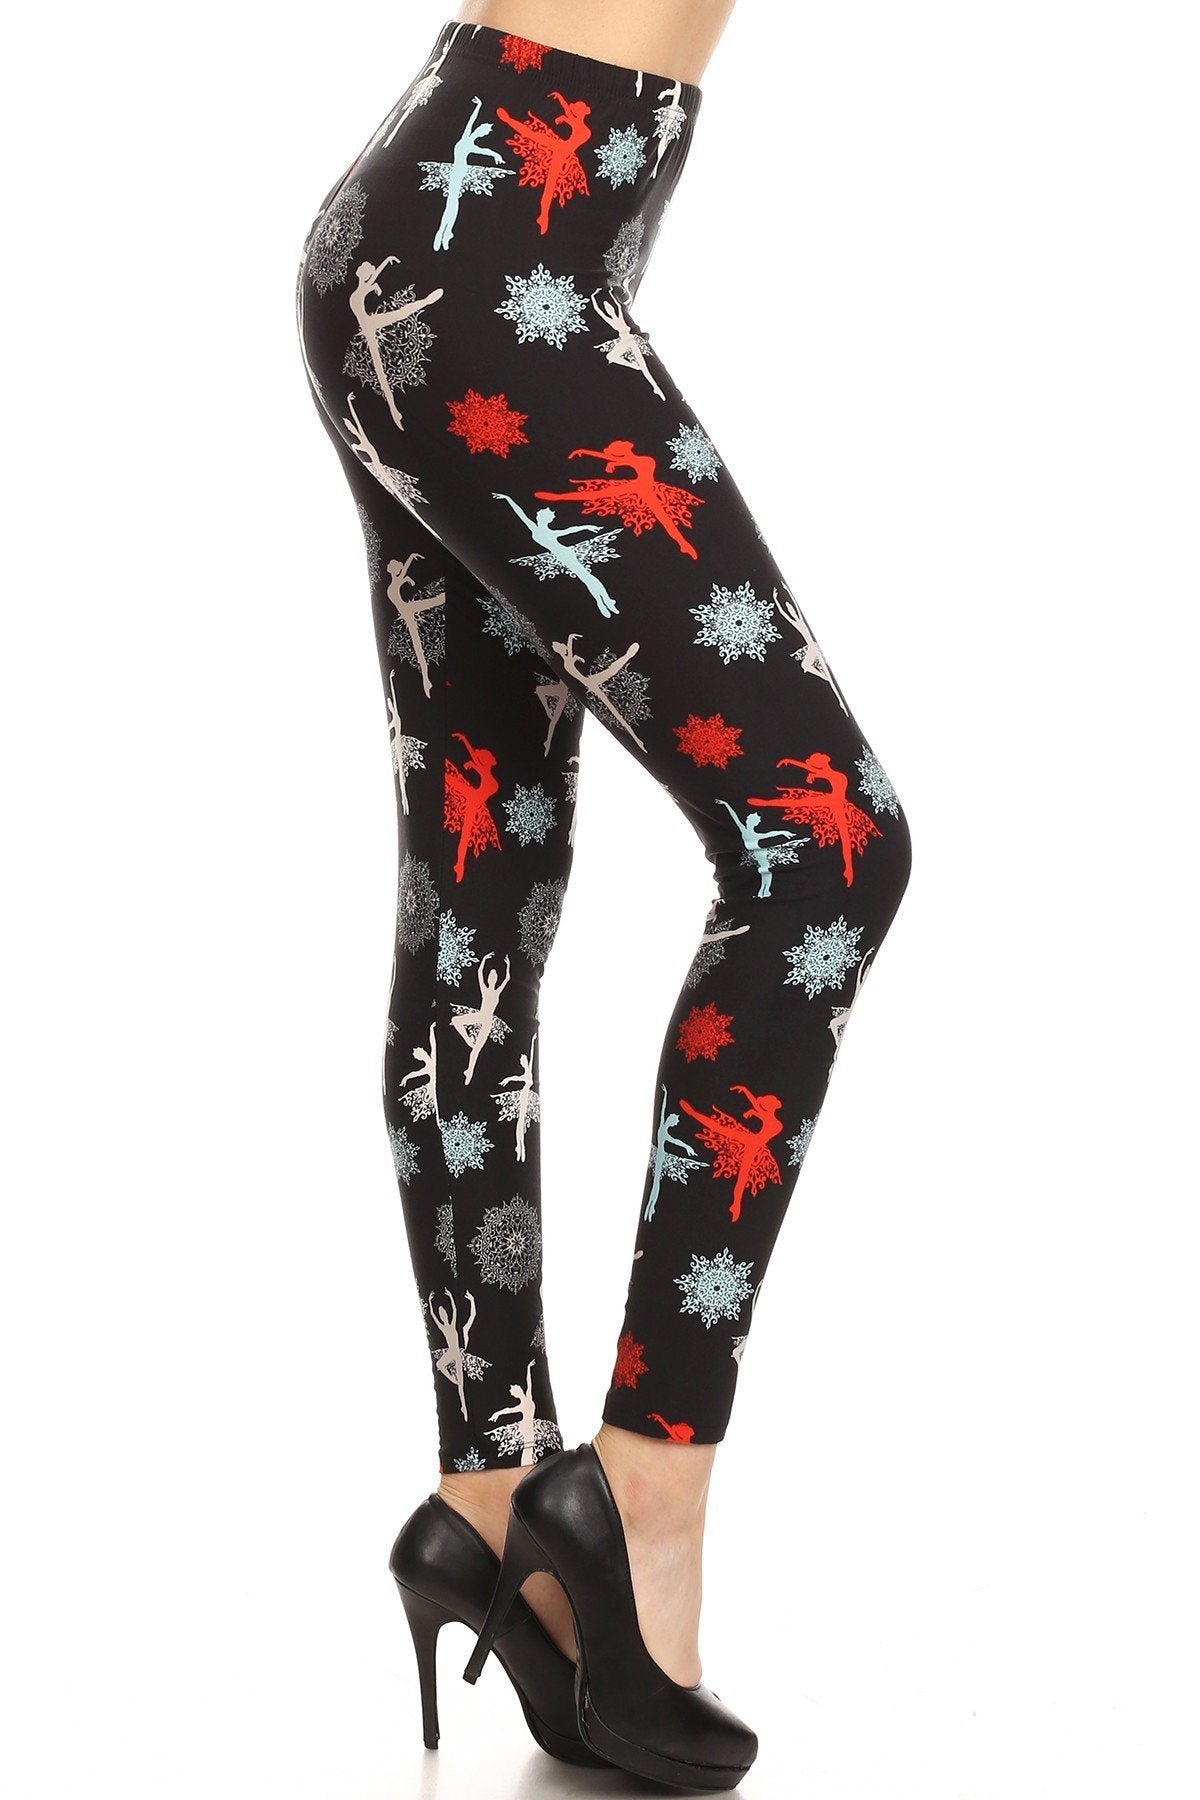 Women's Dance Ballet Printed Leggings: OS and Plus Leggings MomMe and More 